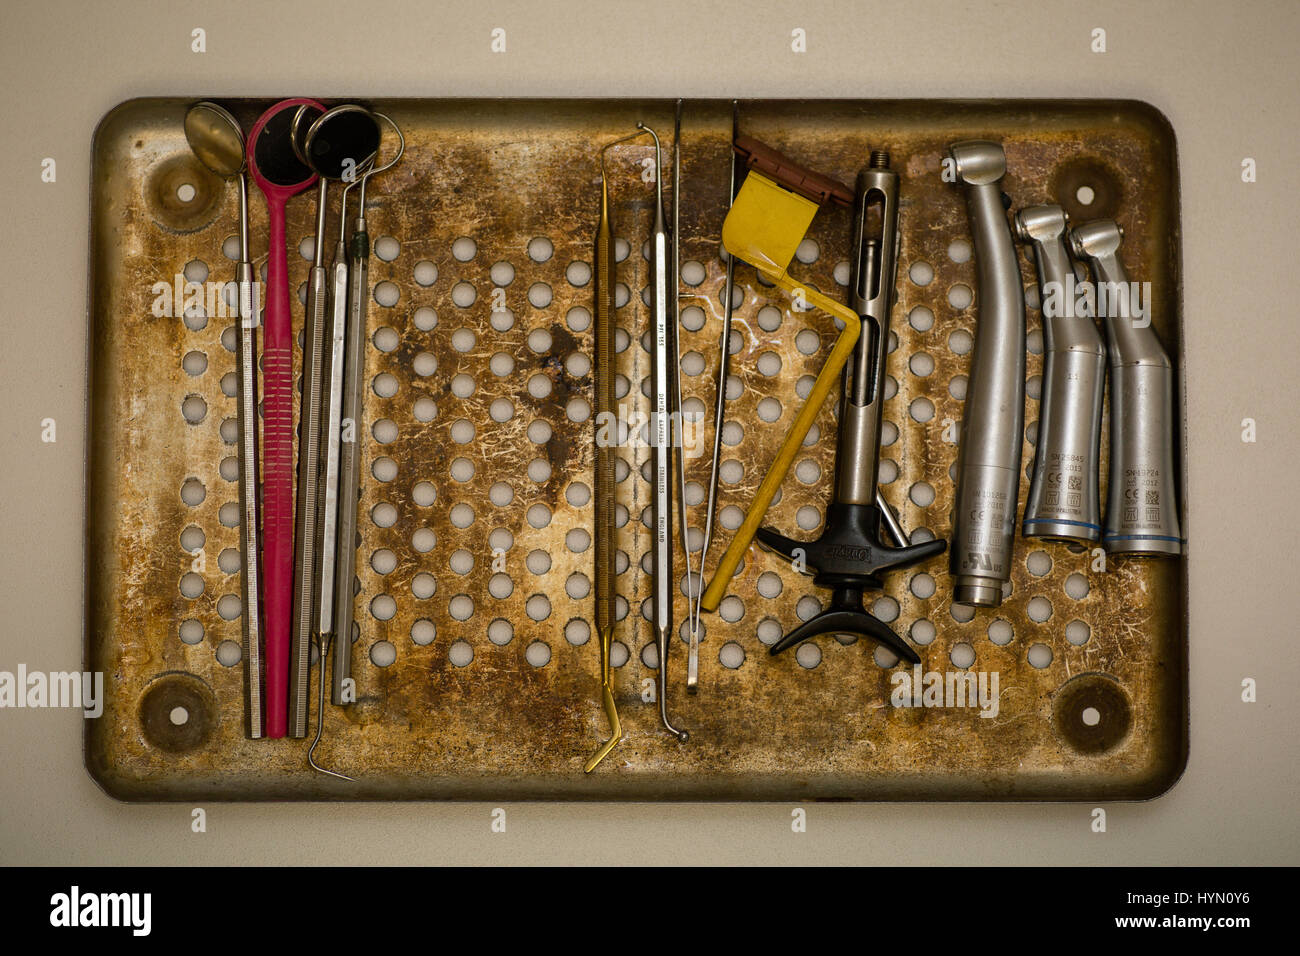 Metal tray with dental surgical instruments sterilized after dental procedure. Stock Photo